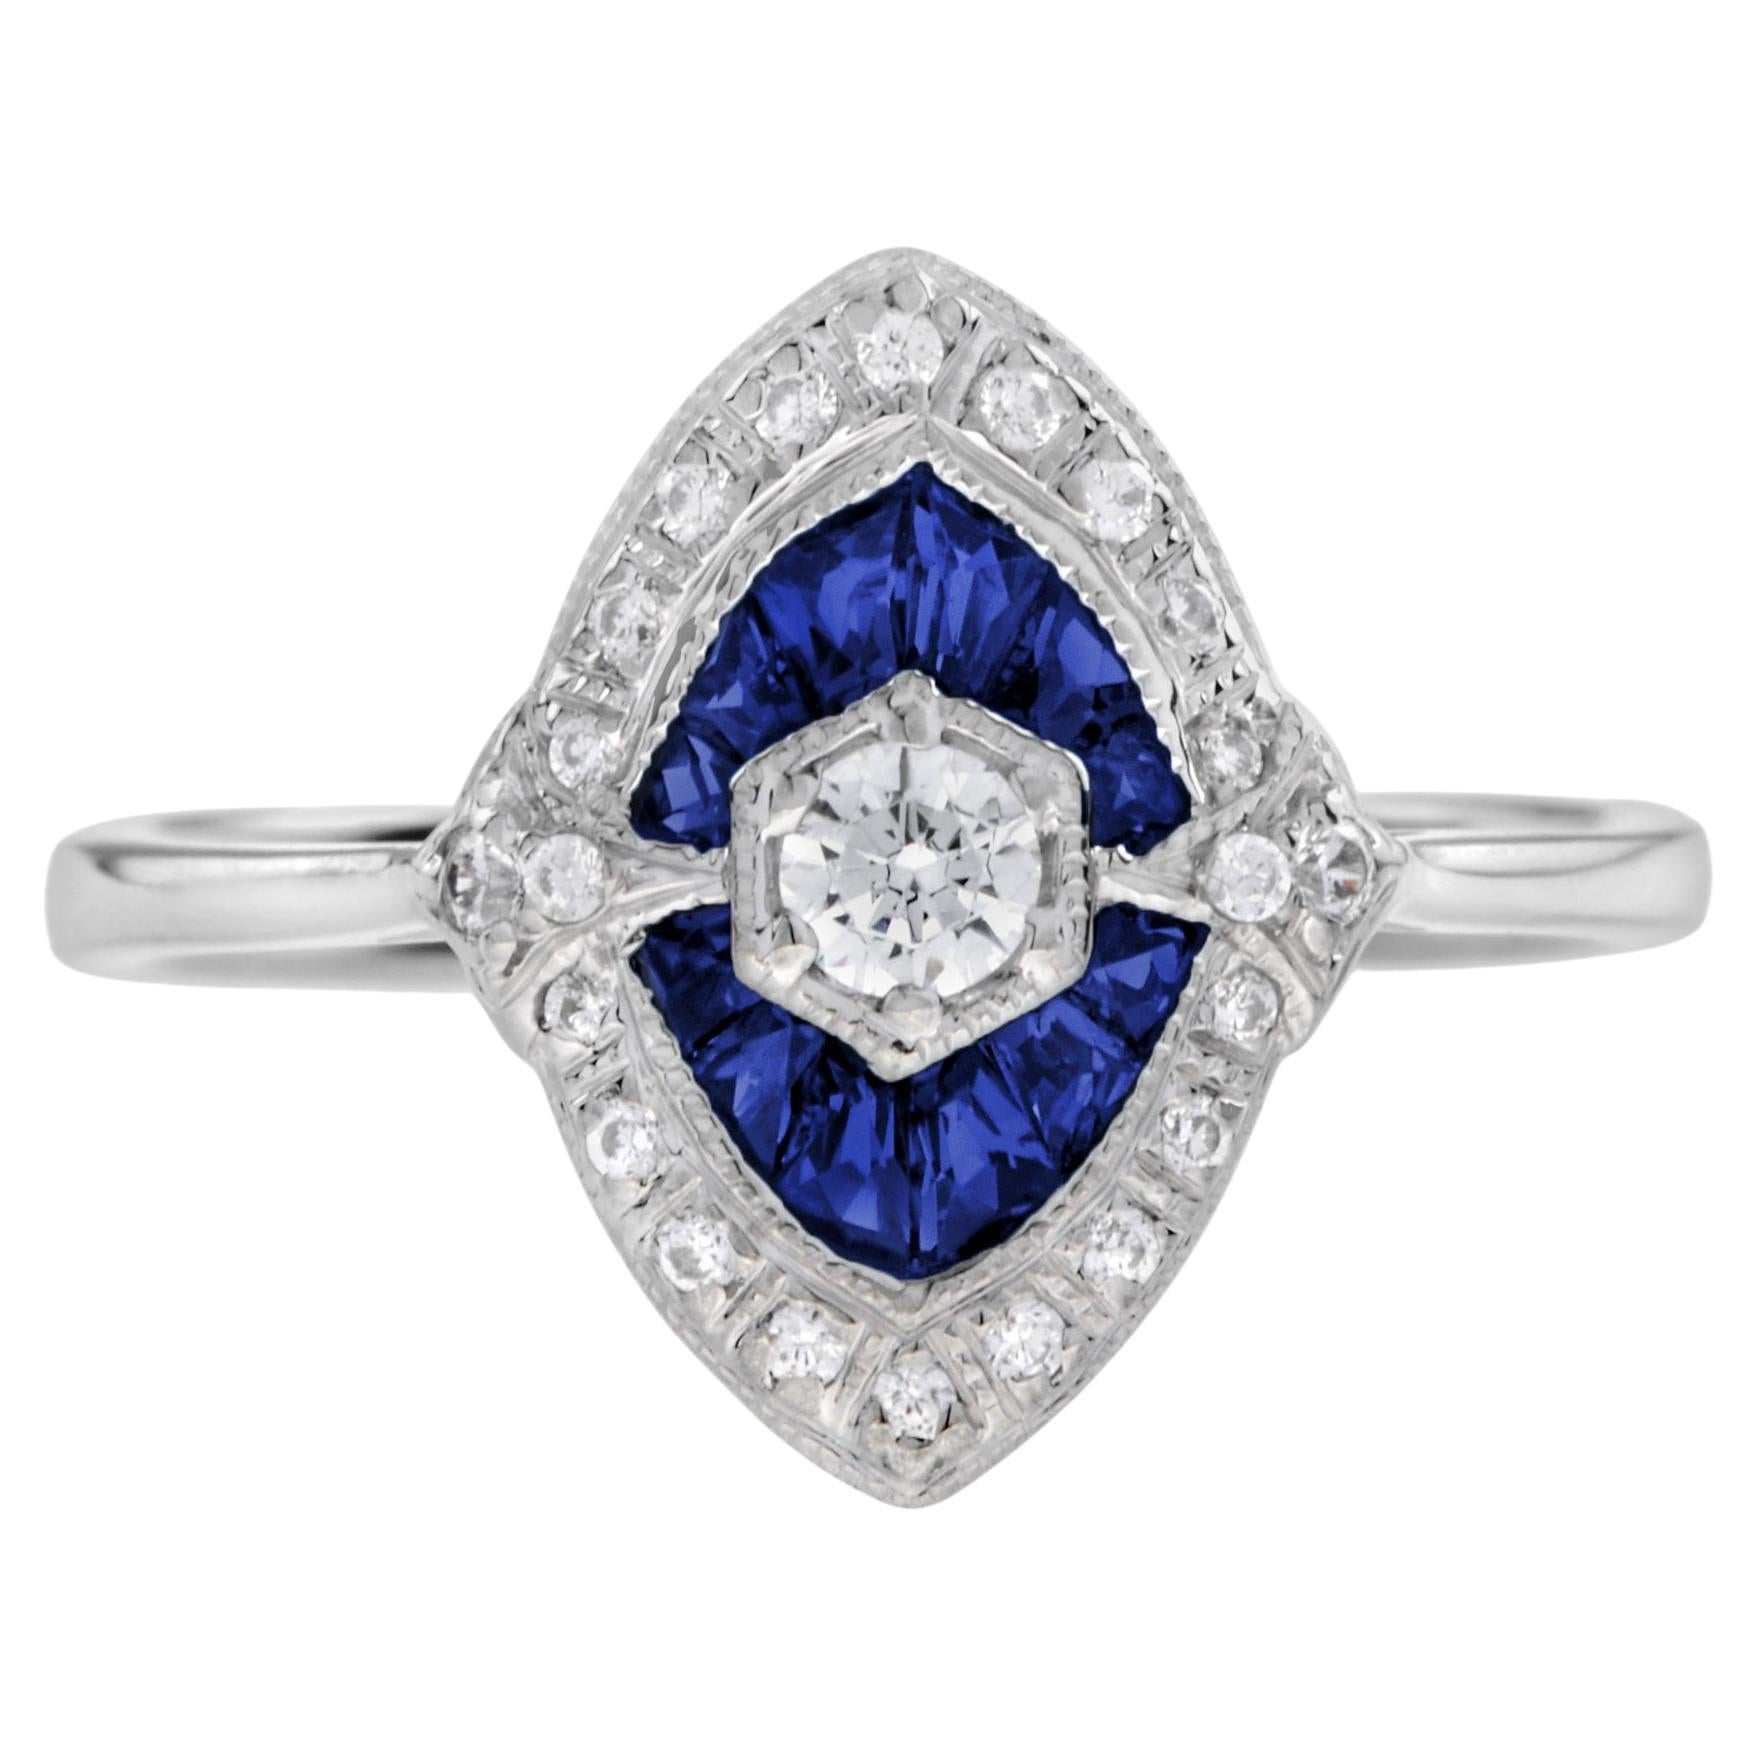 Diamond and Blue Sapphire Art Deco Style Engagement Ring in 18K White Gold For Sale